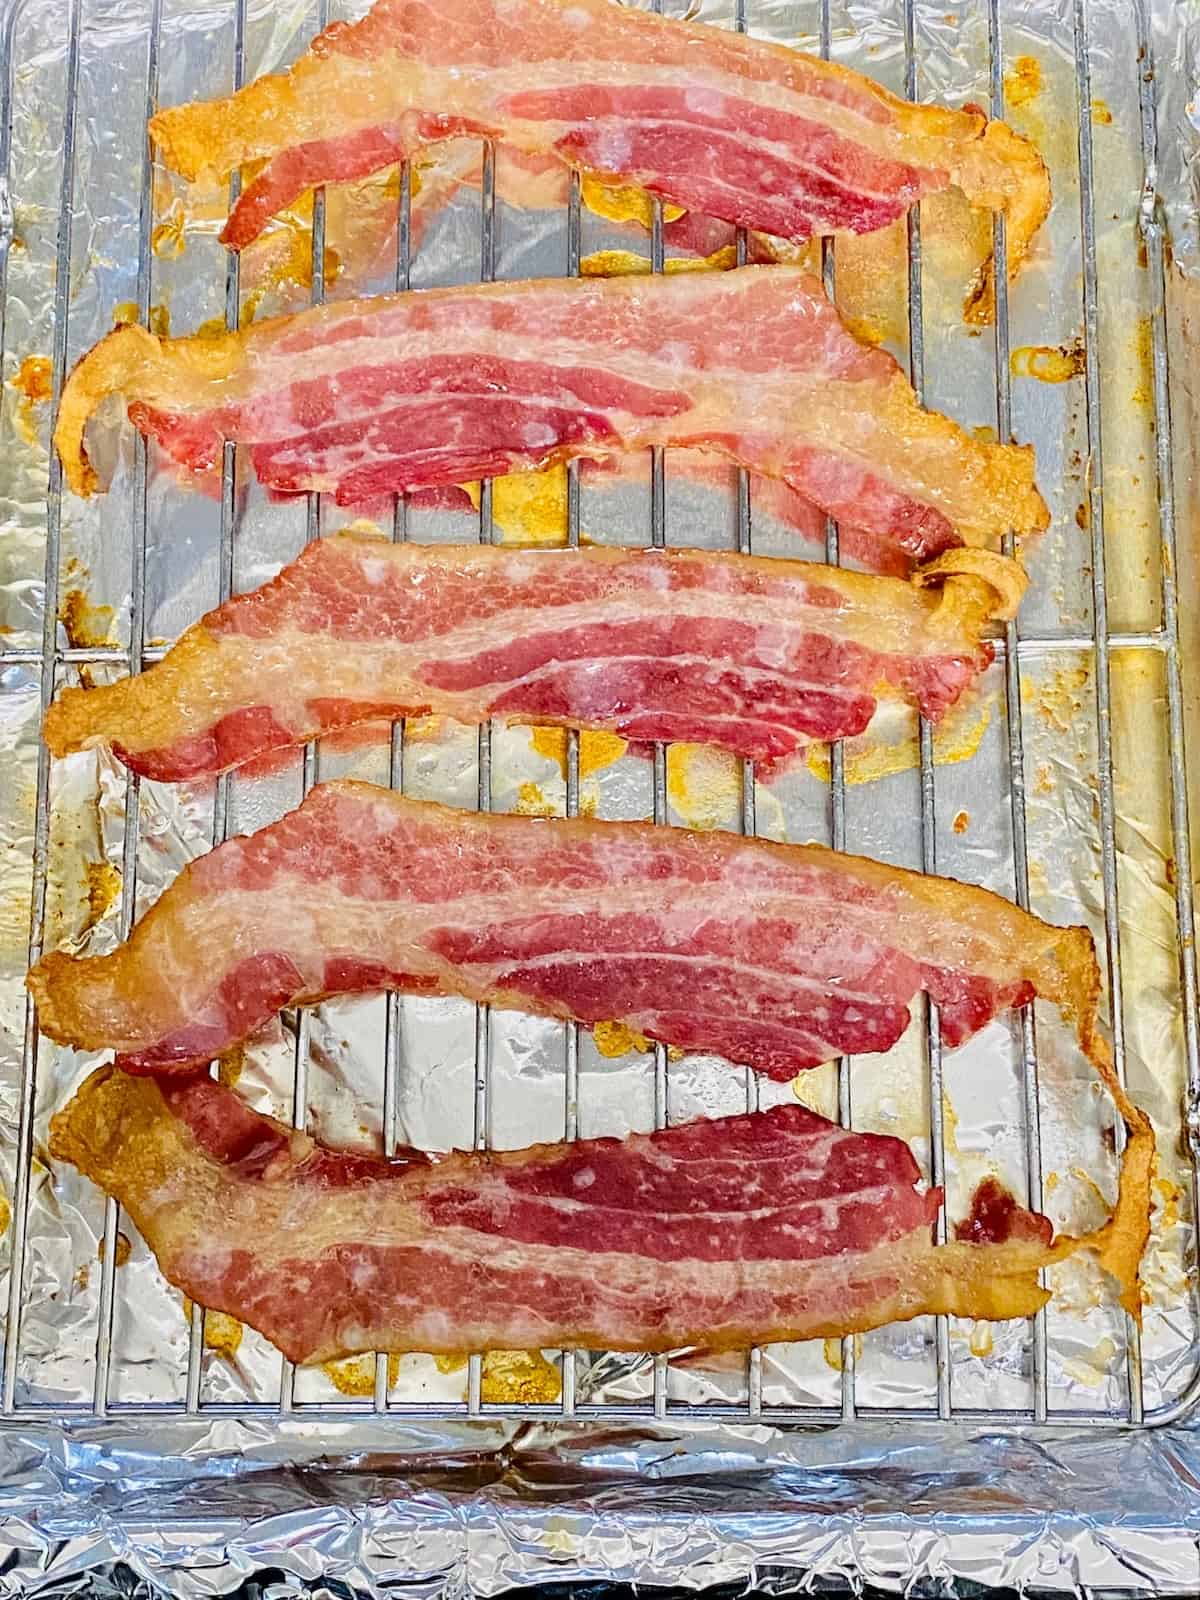 Bacon cooked 12 minutes